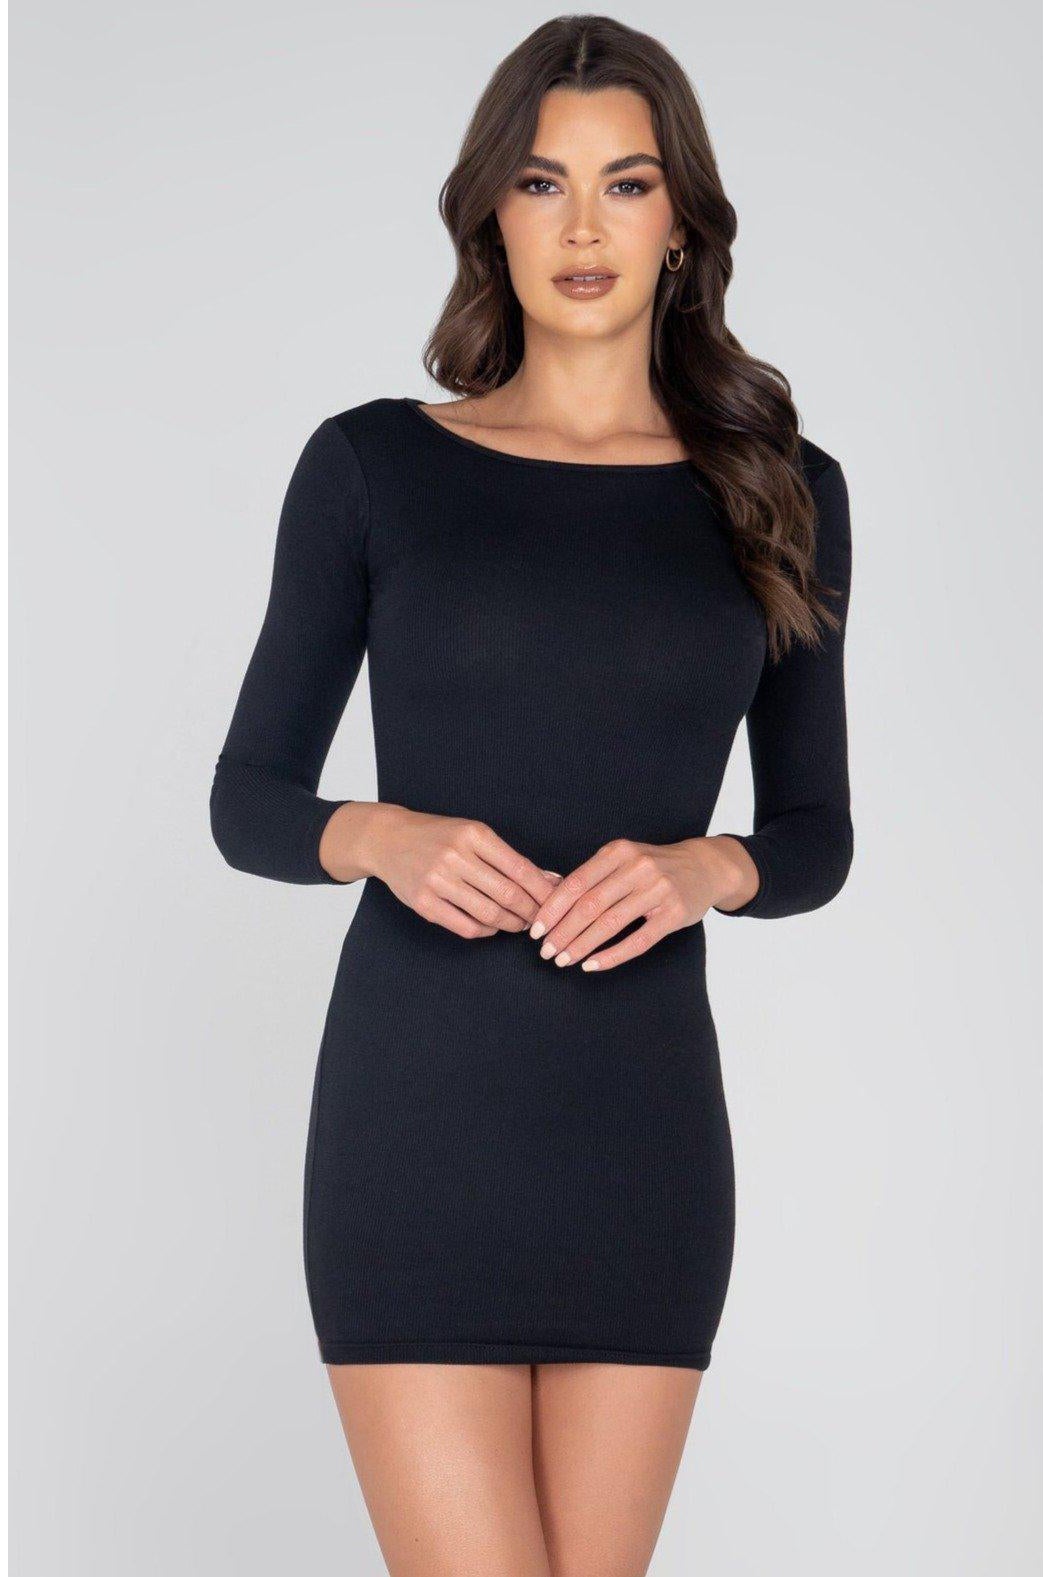 Classic Ribbed Long sleeve Bodycon Dress-Club Dresses-Roma Confidential-Black-L-SEXYSHOES.COM